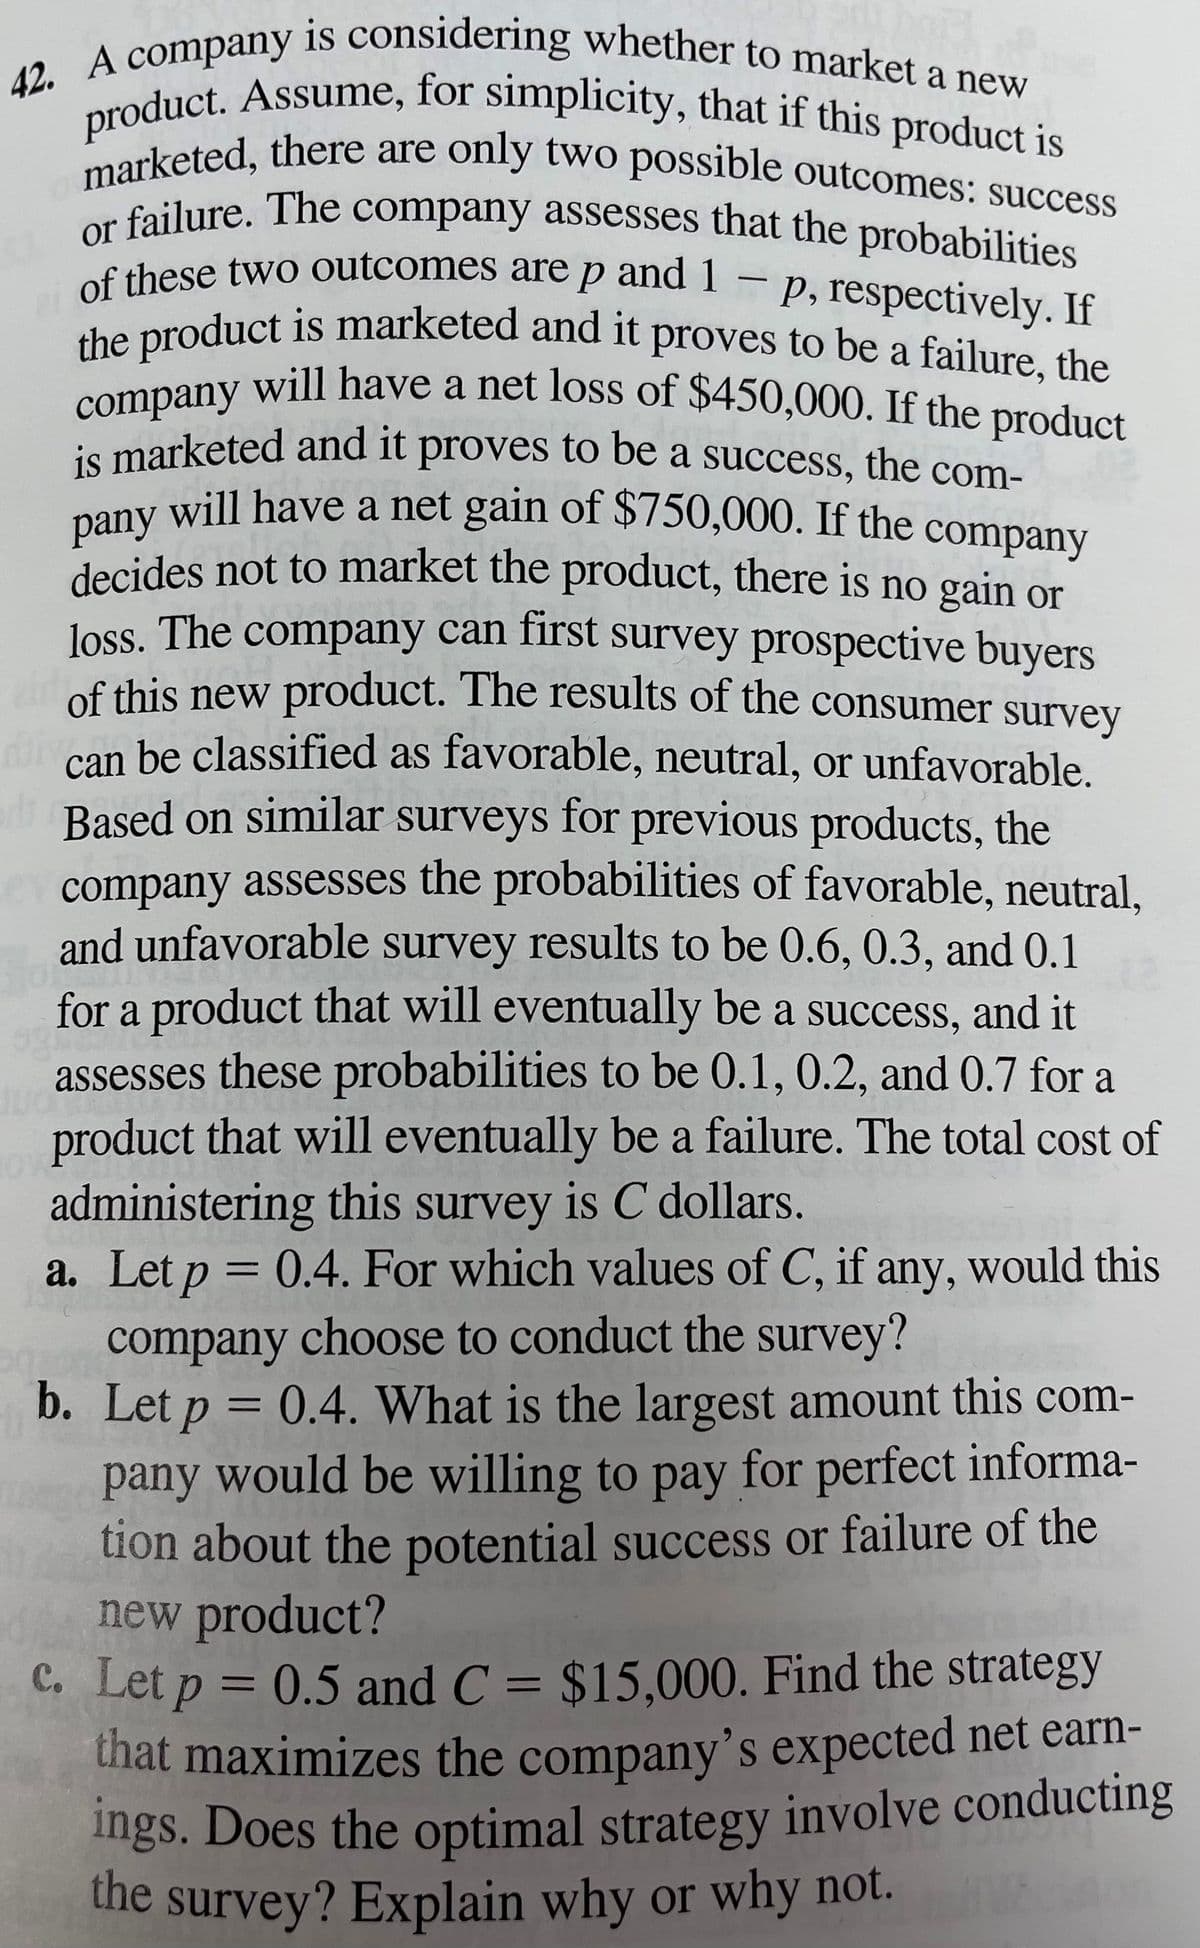 of these two outcomes are p and 1
marketed, there are only two possible outcomes: success
product. Assume, for simplicity, that if this product is
company will have a net loss of $450,000. If the product
or failure. The company assesses that the probabilities
pany will have a net gain of $750,000. If the company
42. A company is considering whether to market a new
the product is marketed and it proves to be a failure, the
is marketed and it proves to be a success, the com-
of these two outcomes are p and 1
p, respectively. If
-
it
a
is marketed and it proves to be a success, the com-
will have a net gain of $750,000. If the company
decides not to market the product, there is no gain or
loss. The company can first survey prospective buyers
of this new product. The results of the consumer survey
divan be classified as favorable, neutral, or unfavorable.
Based on similar surveys for previous products, the
company assesses the probabilities of favorable, neutral,
and unfavorable survey results to be 0.6, 0.3, and 0.1
for a product that will eventually be a success, and it
assesses these probabilities to be 0.1, 0.2, and 0.7 for a
product that will eventually be a failure. The total cost of
administering this survey is C dollars.
a. Let p = 0.4. For which values of C, if any, would this
company choose to conduct the survey?
b. Let p = 0.4. What is the largest amount this com-
pany would be willing to pay for perfect informa-
tion about the potential success or failure of the
new product?
C. Let p = 0.5 and C = $15.000. Find the strategy
that maximizes the company's expected net earn-
%3D
Ings. Does the optimal strategy involve conducting
the
survey? Explain why or why not.
